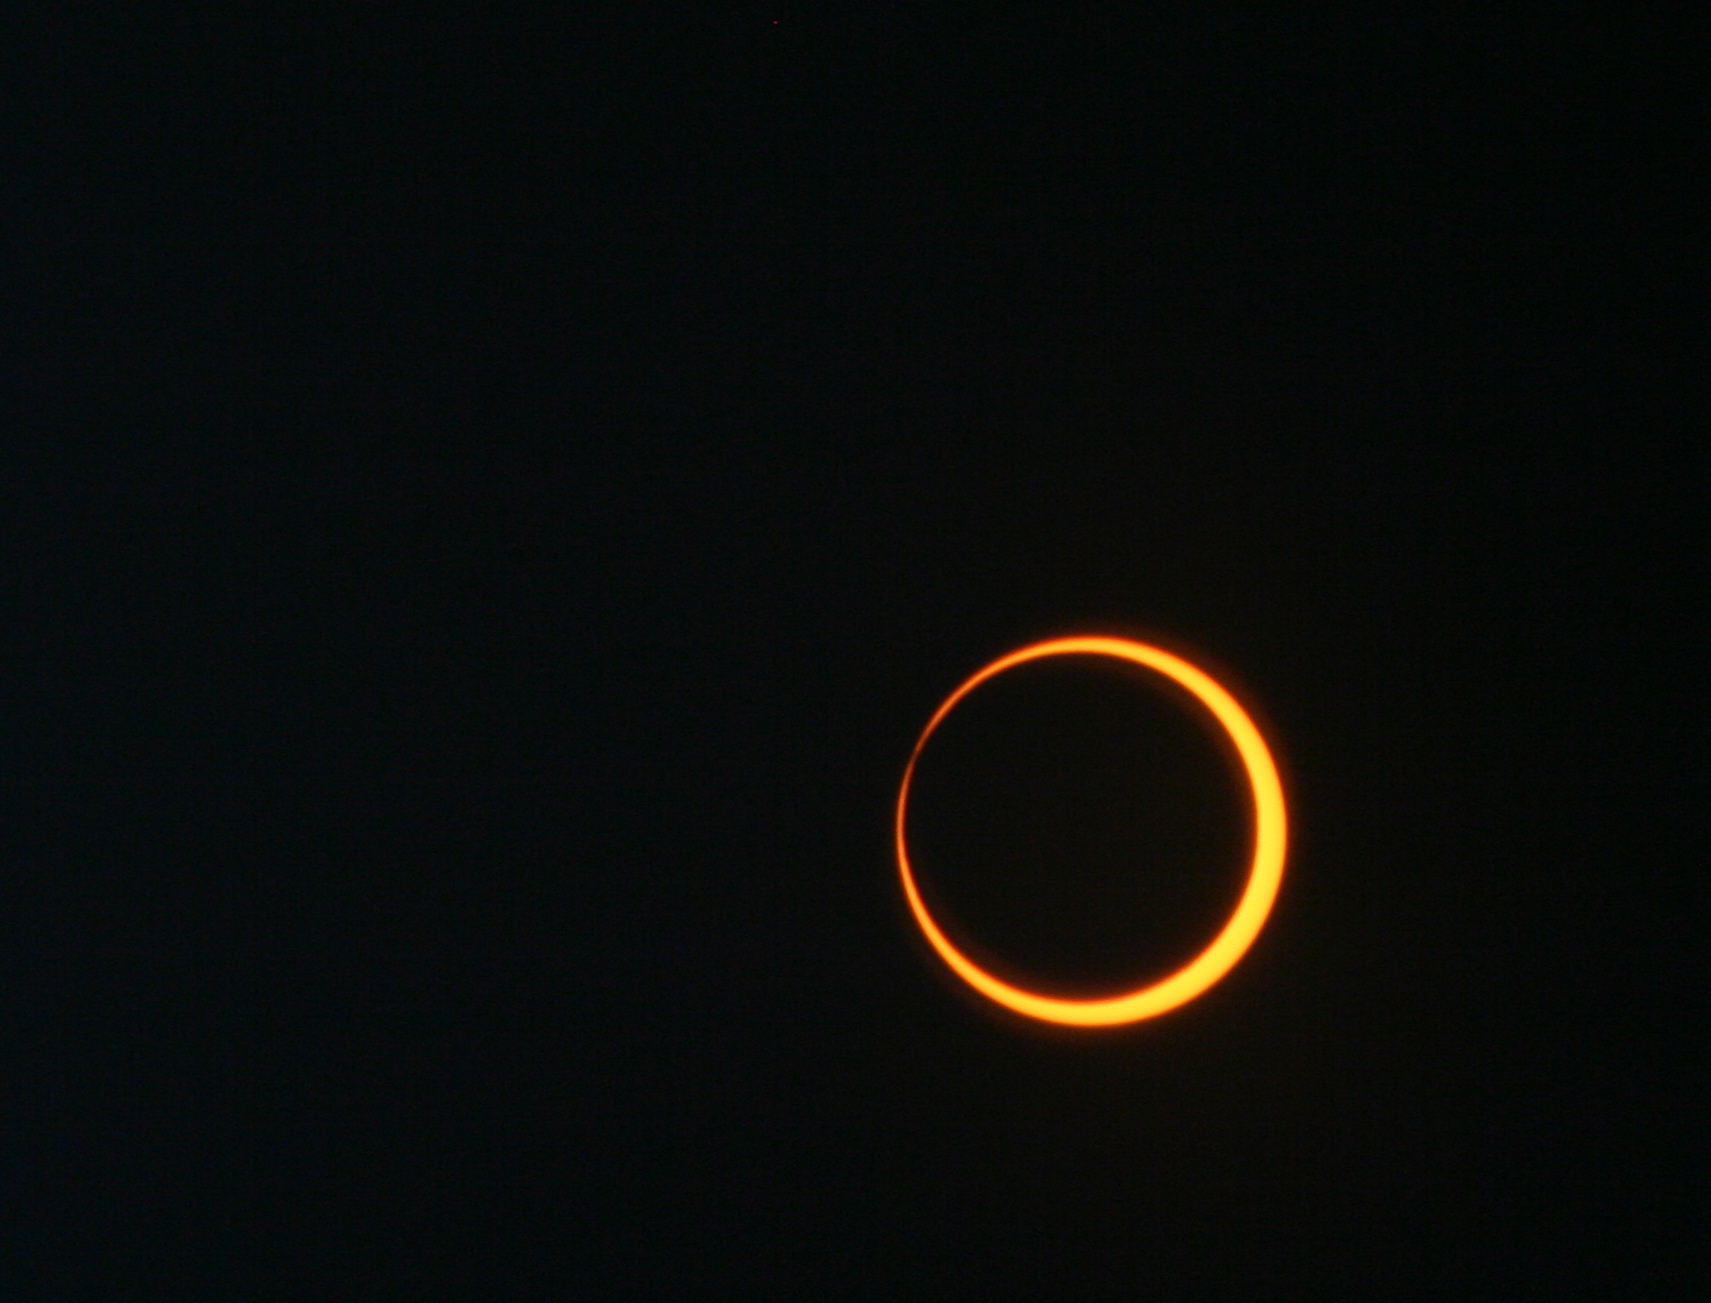 The orange glow of the sun emanates from behind a silhouette of the moon against a dark sky.